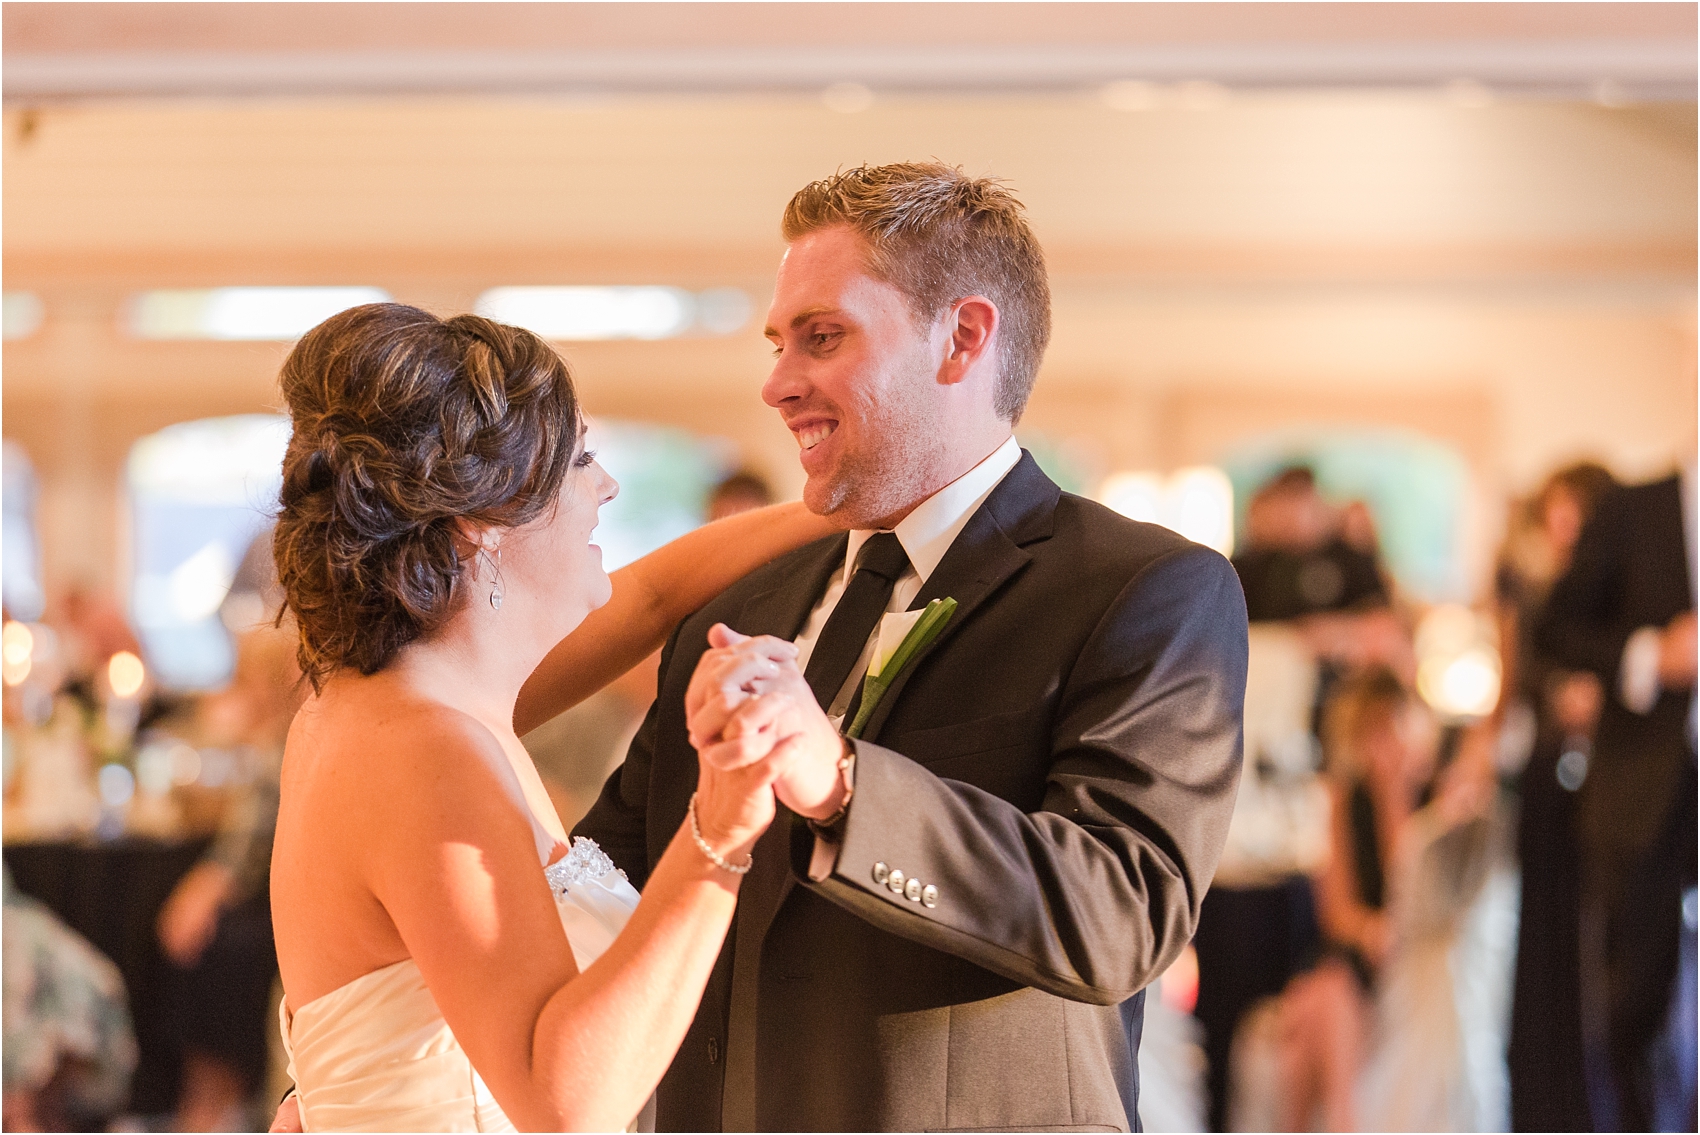 classic-wedding-photos-at-great-oaks-country-club-in-rochester-hills-mi-by-courtney-carolyn-photography_0105.jpg